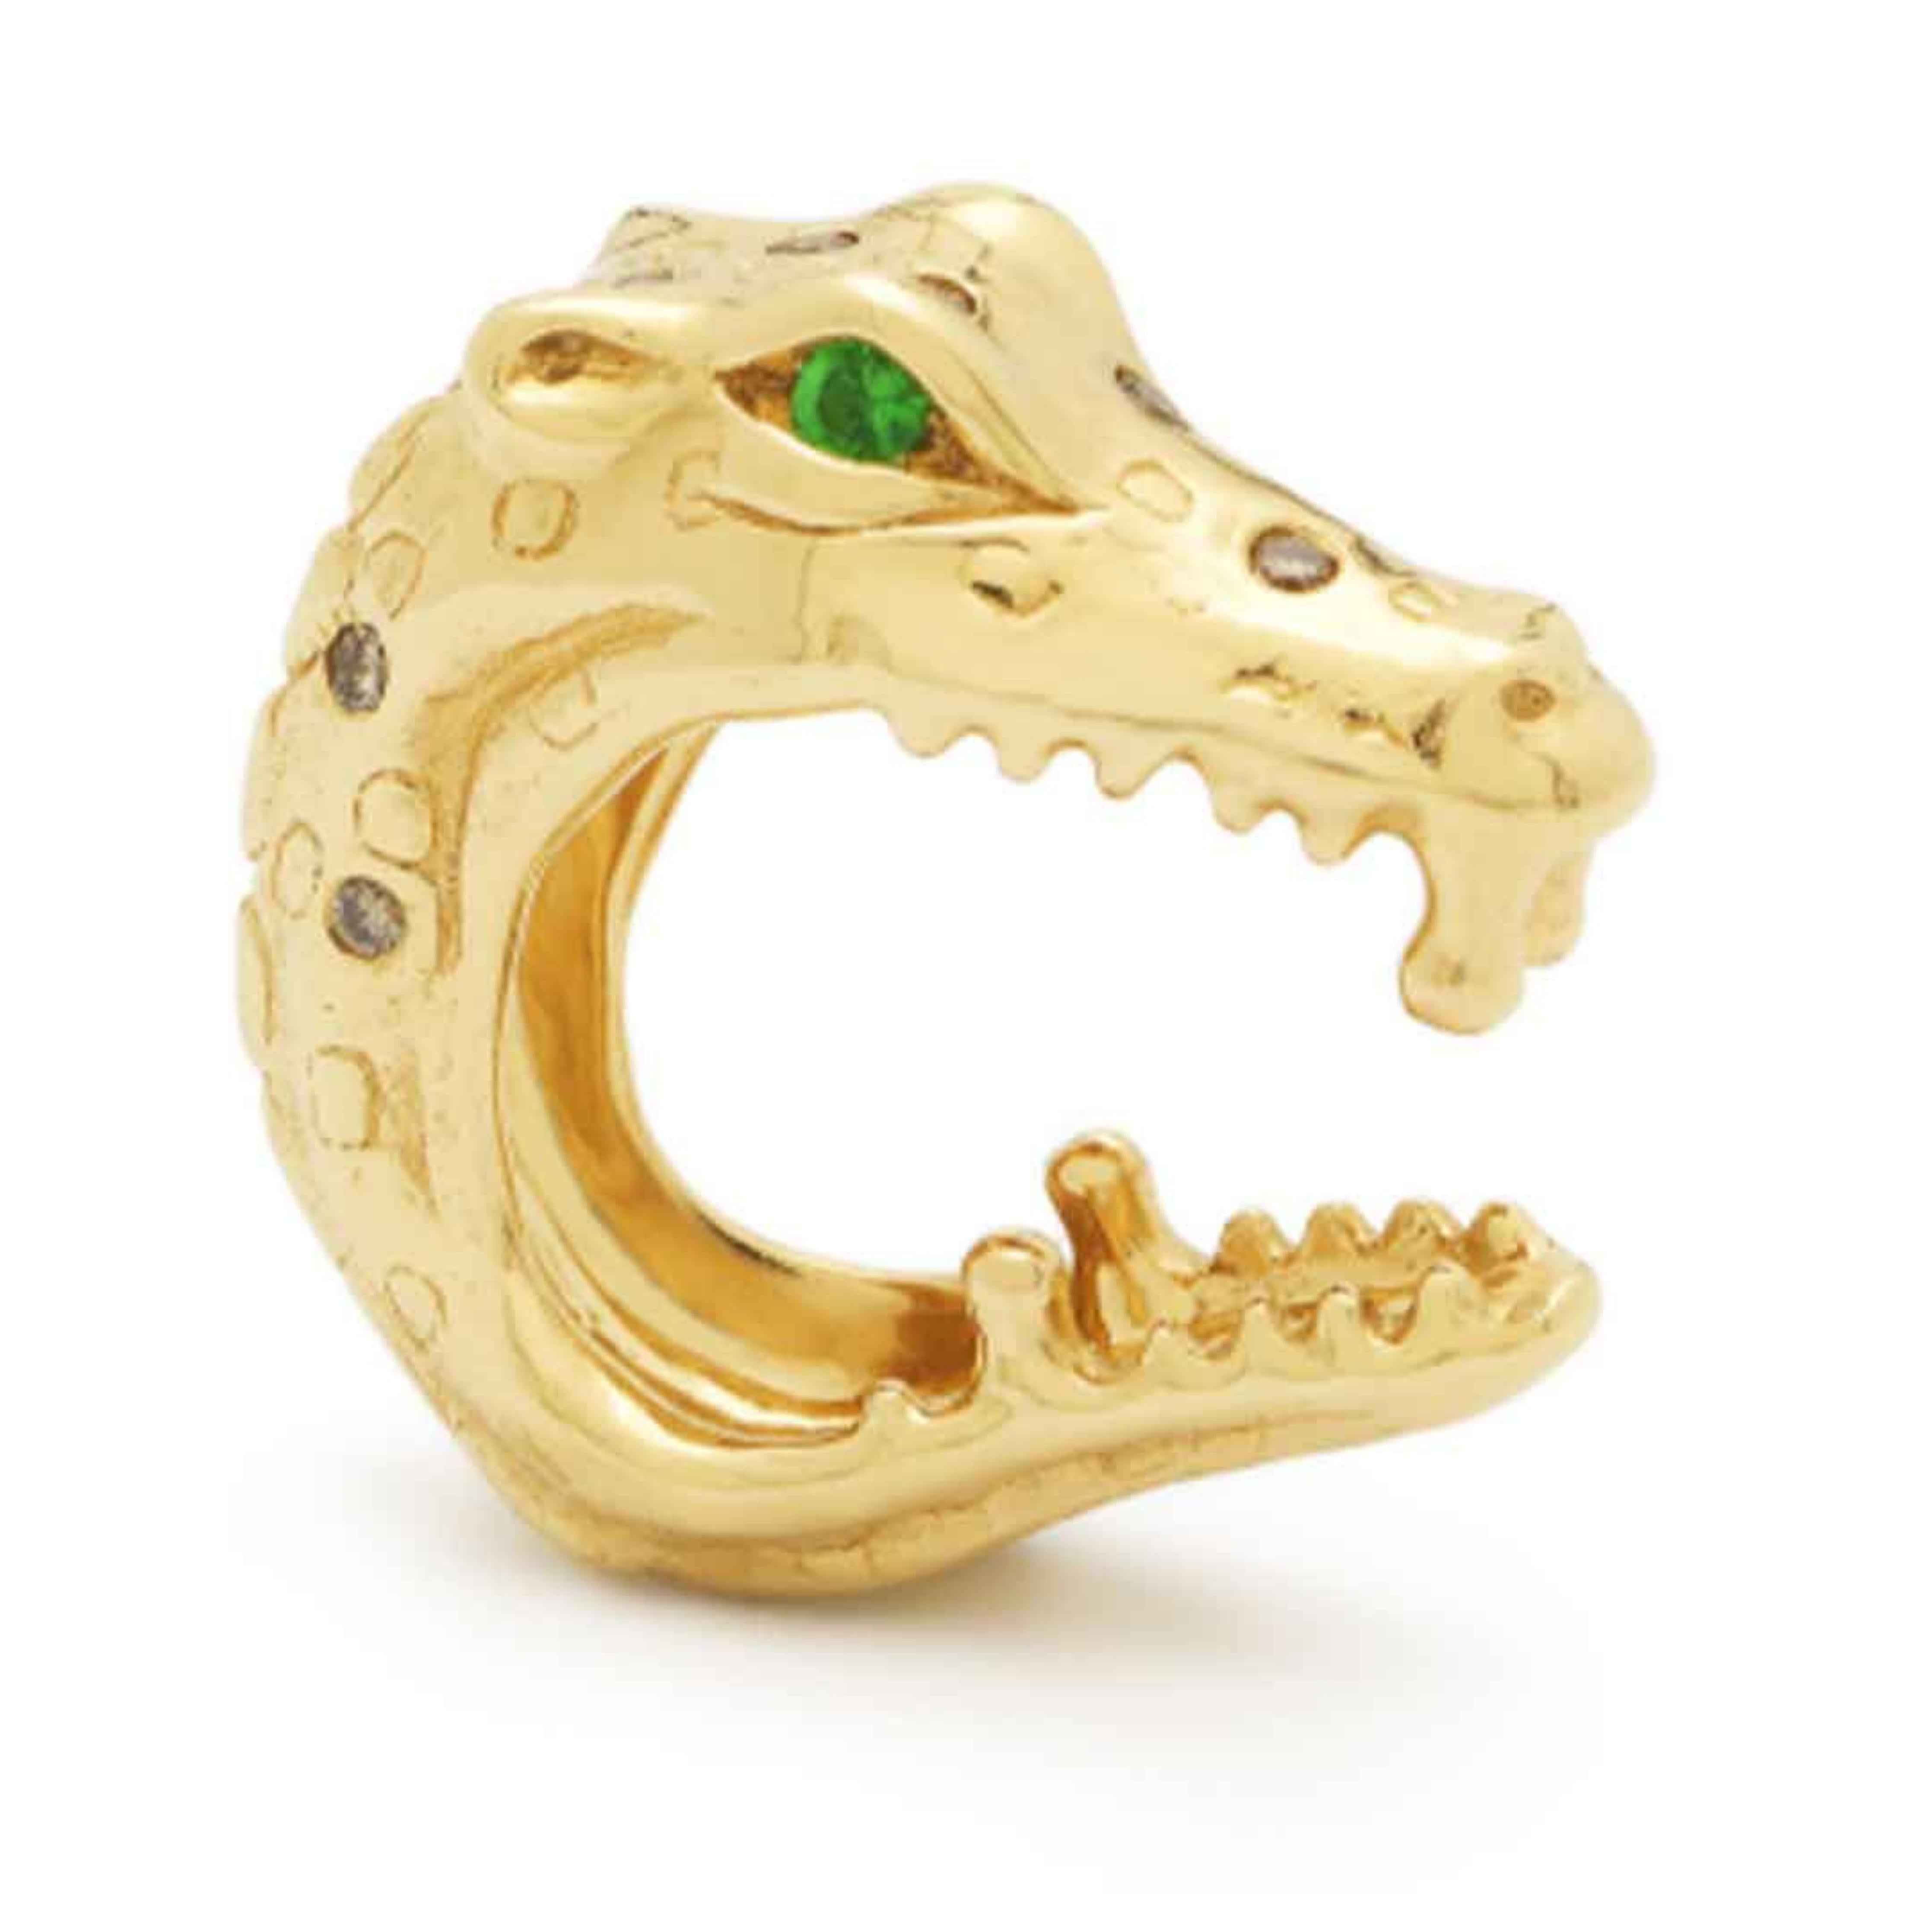 Bibi van der Velden Alligator Bite Earhugger. An ear cuff in the shape of a biting alligator. Made from 18K gold and emerald eyes with diamond accents. Photo shows ear cuff from the side view.